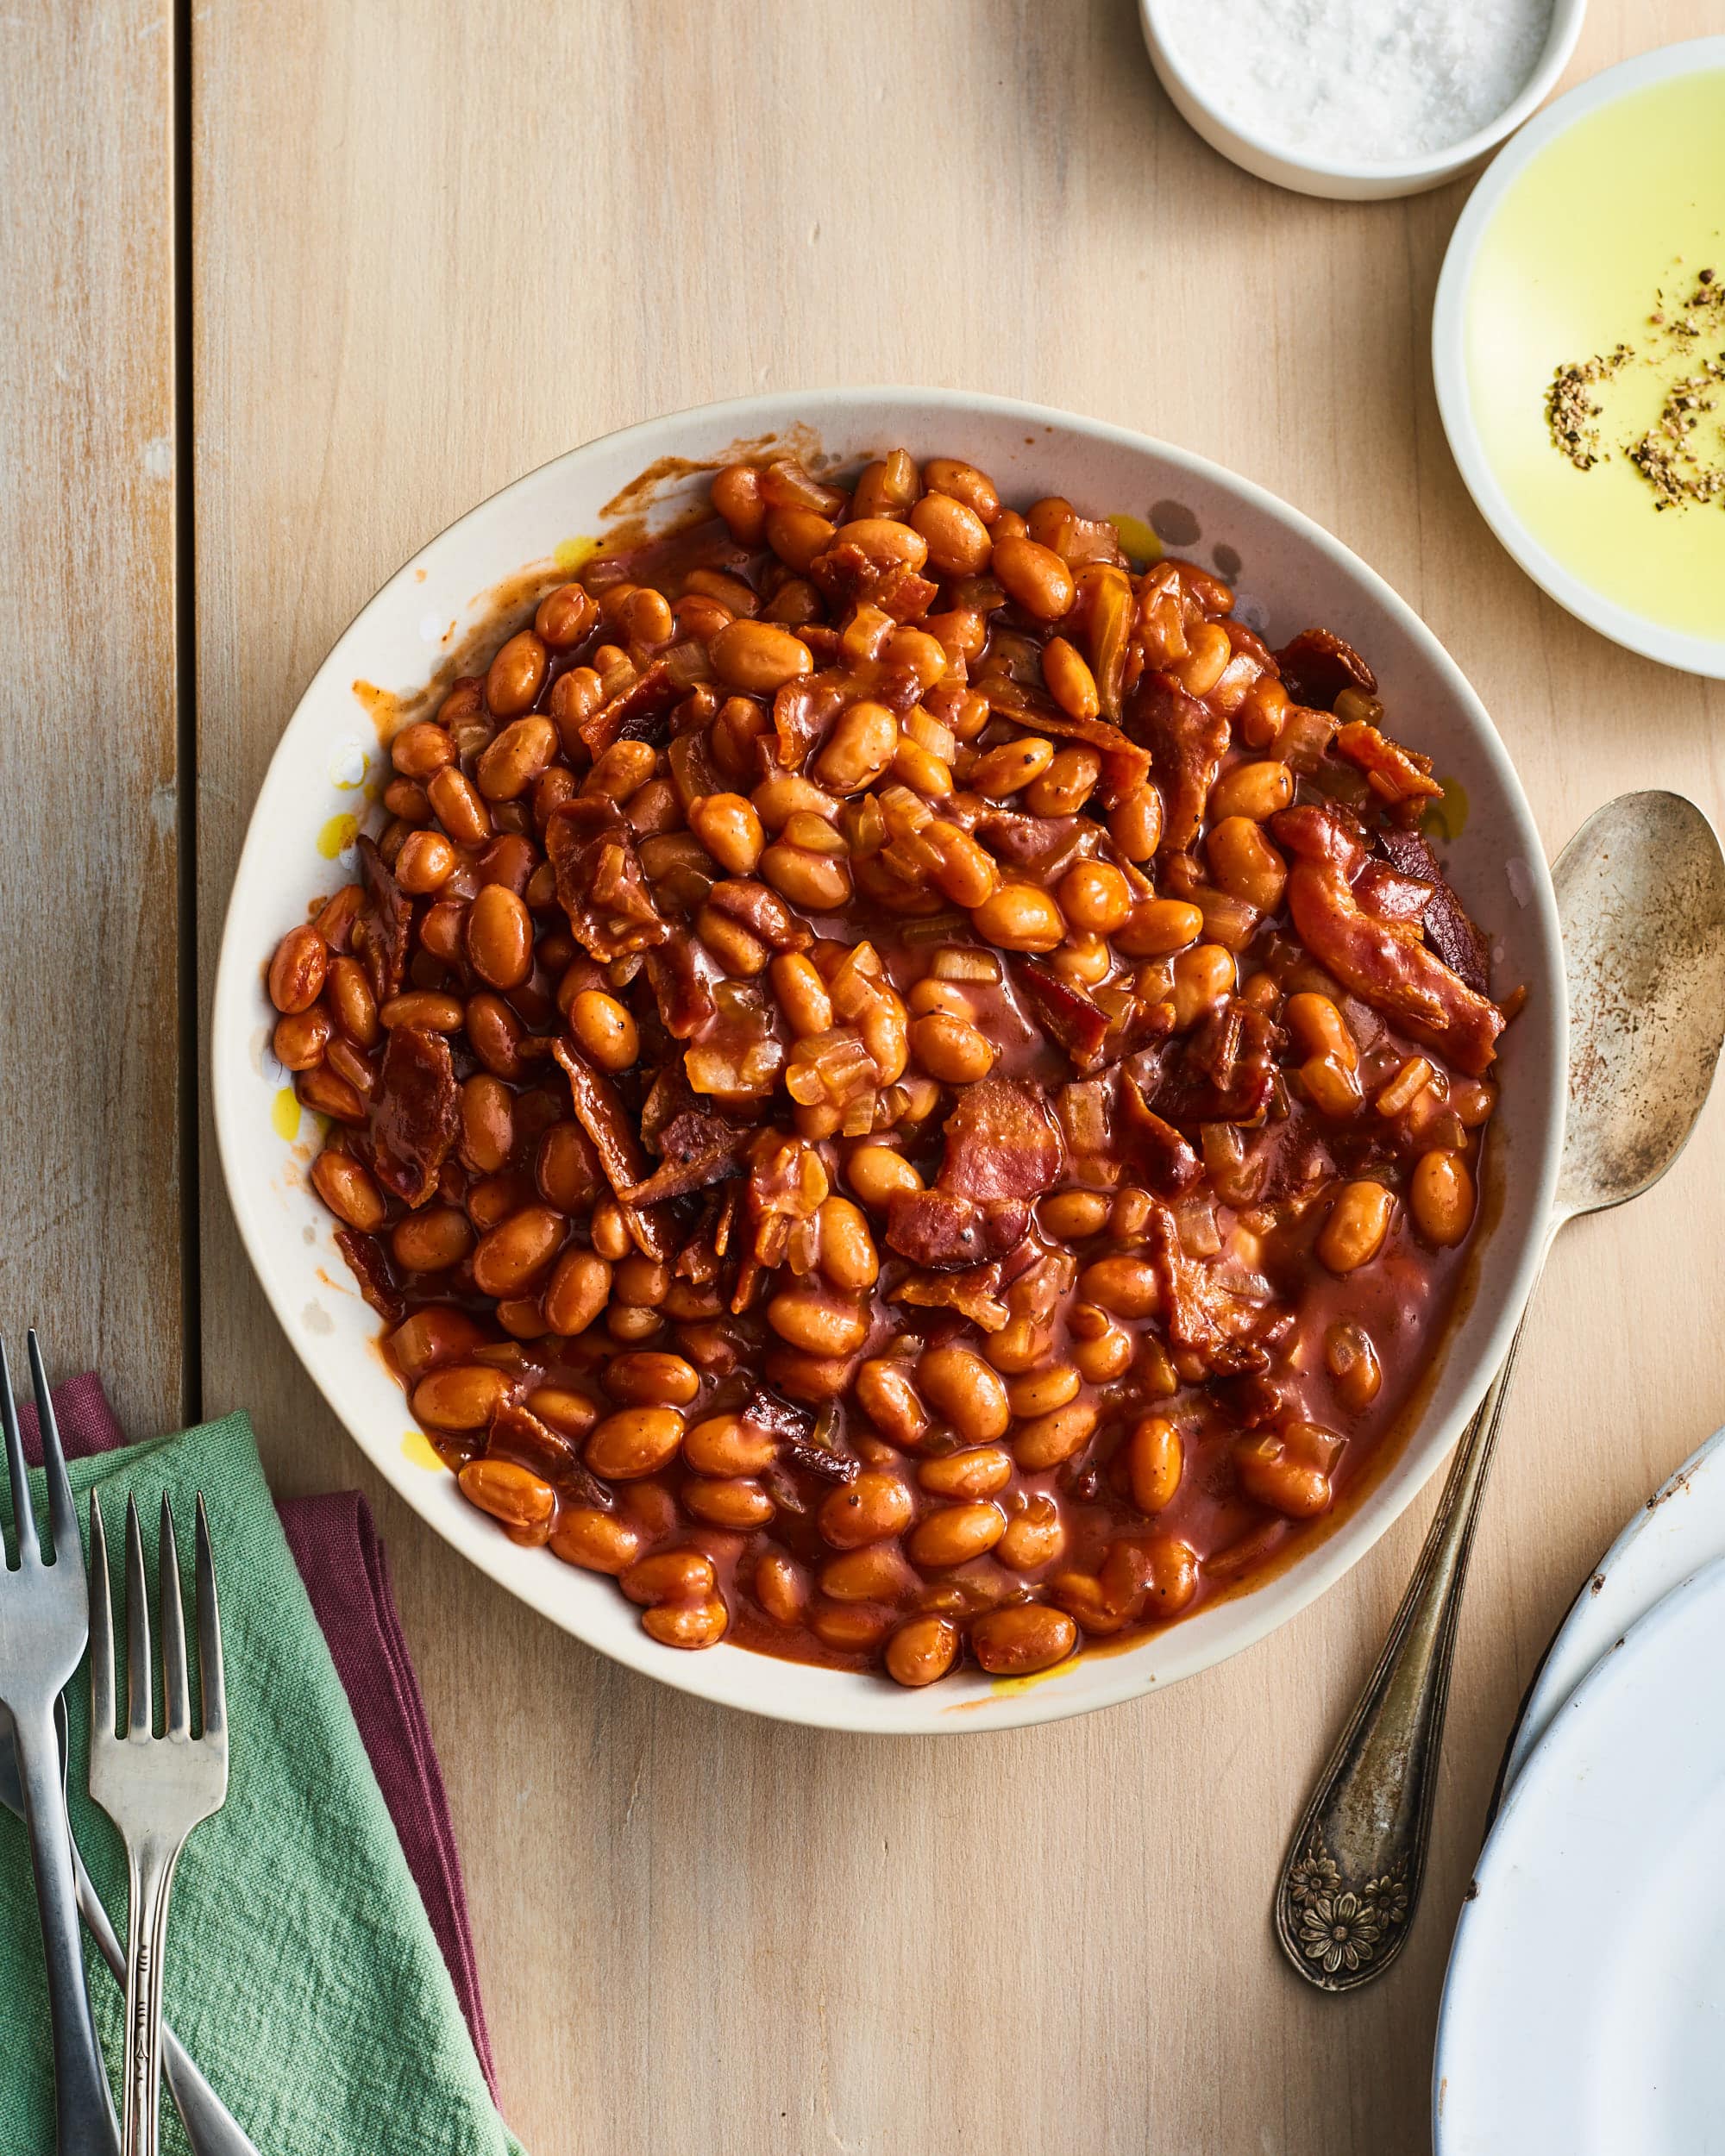 Quick Weight Loss Advice: Instant Pot Baked Beans Are Side Dish Goals